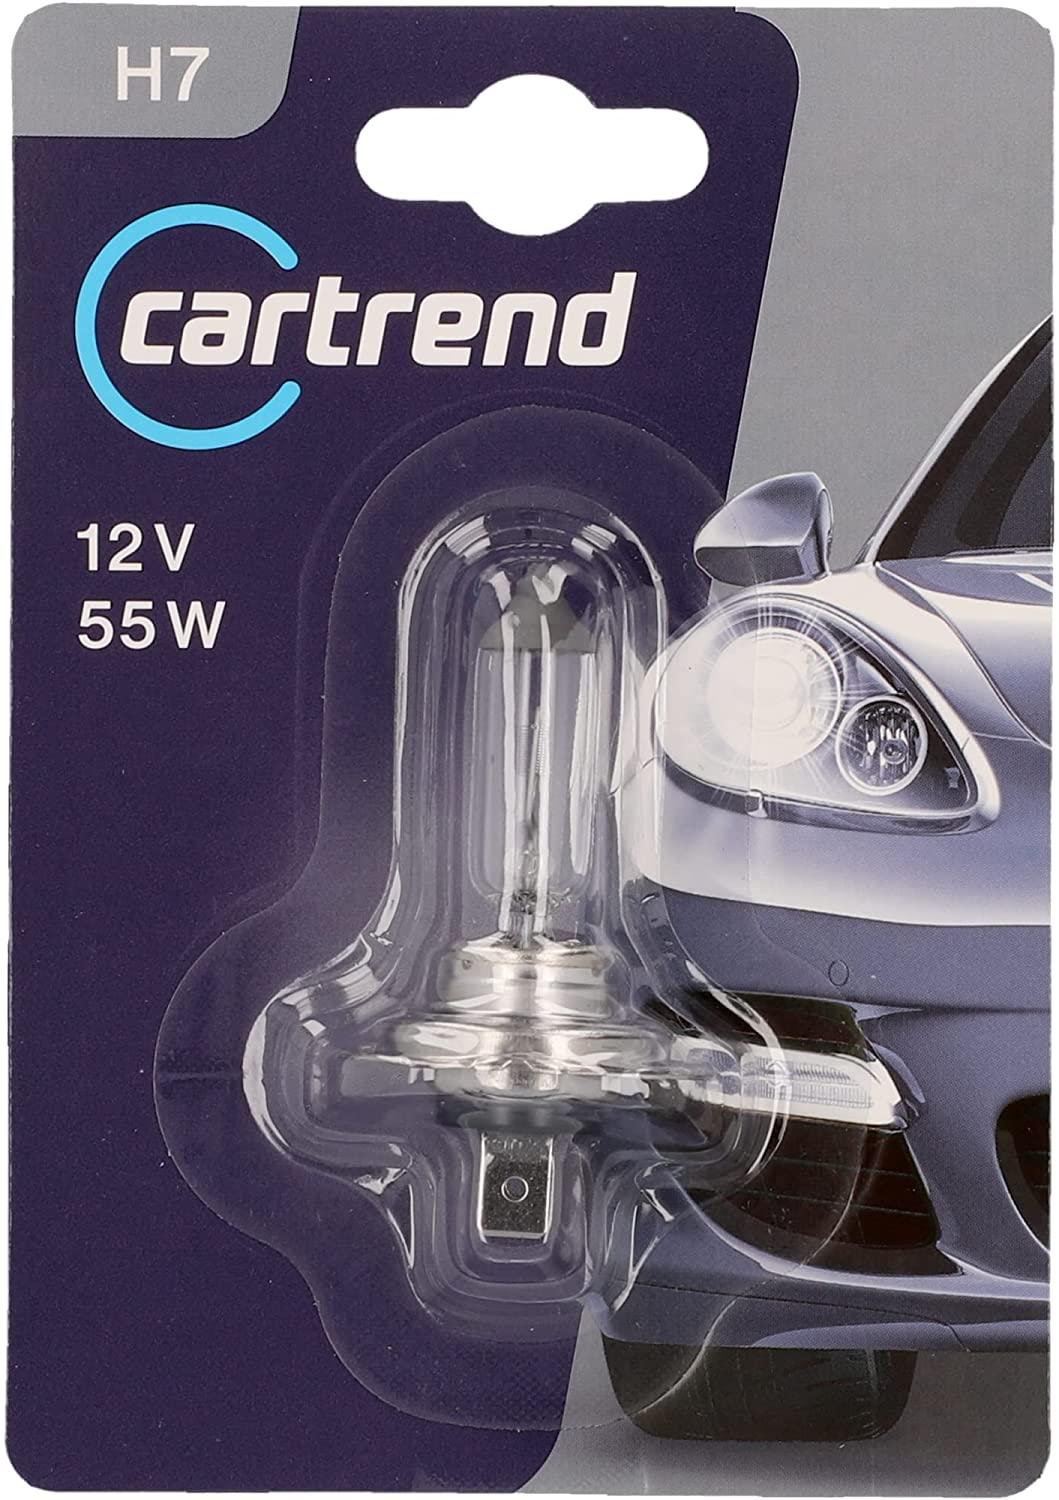 Cartrend H7 Autolampe 12V 55W